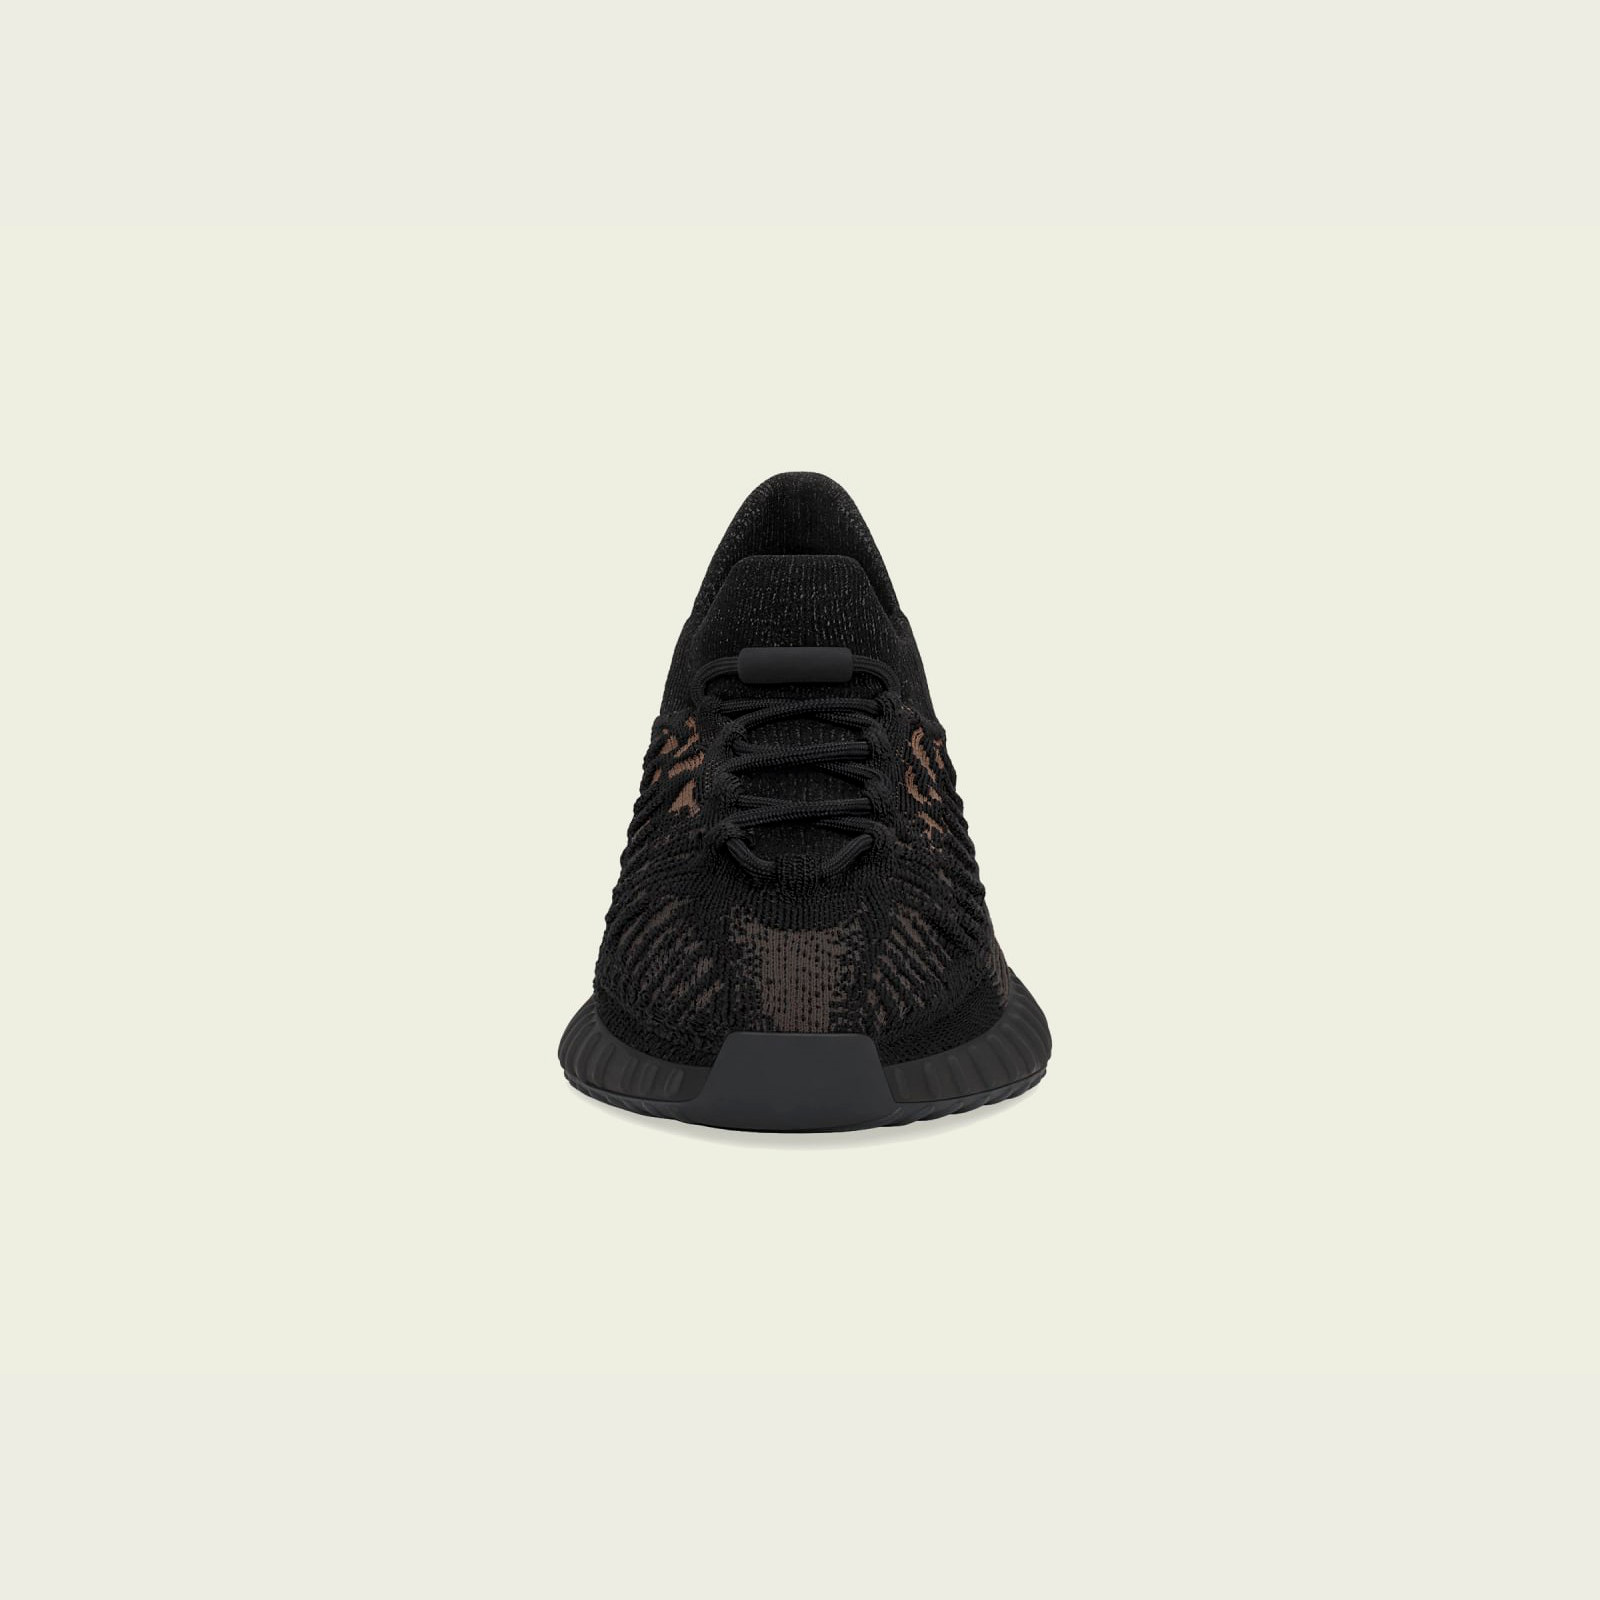 Adidas Yeezy Boost 350
V2 CMPCT
« Slate Carbon »